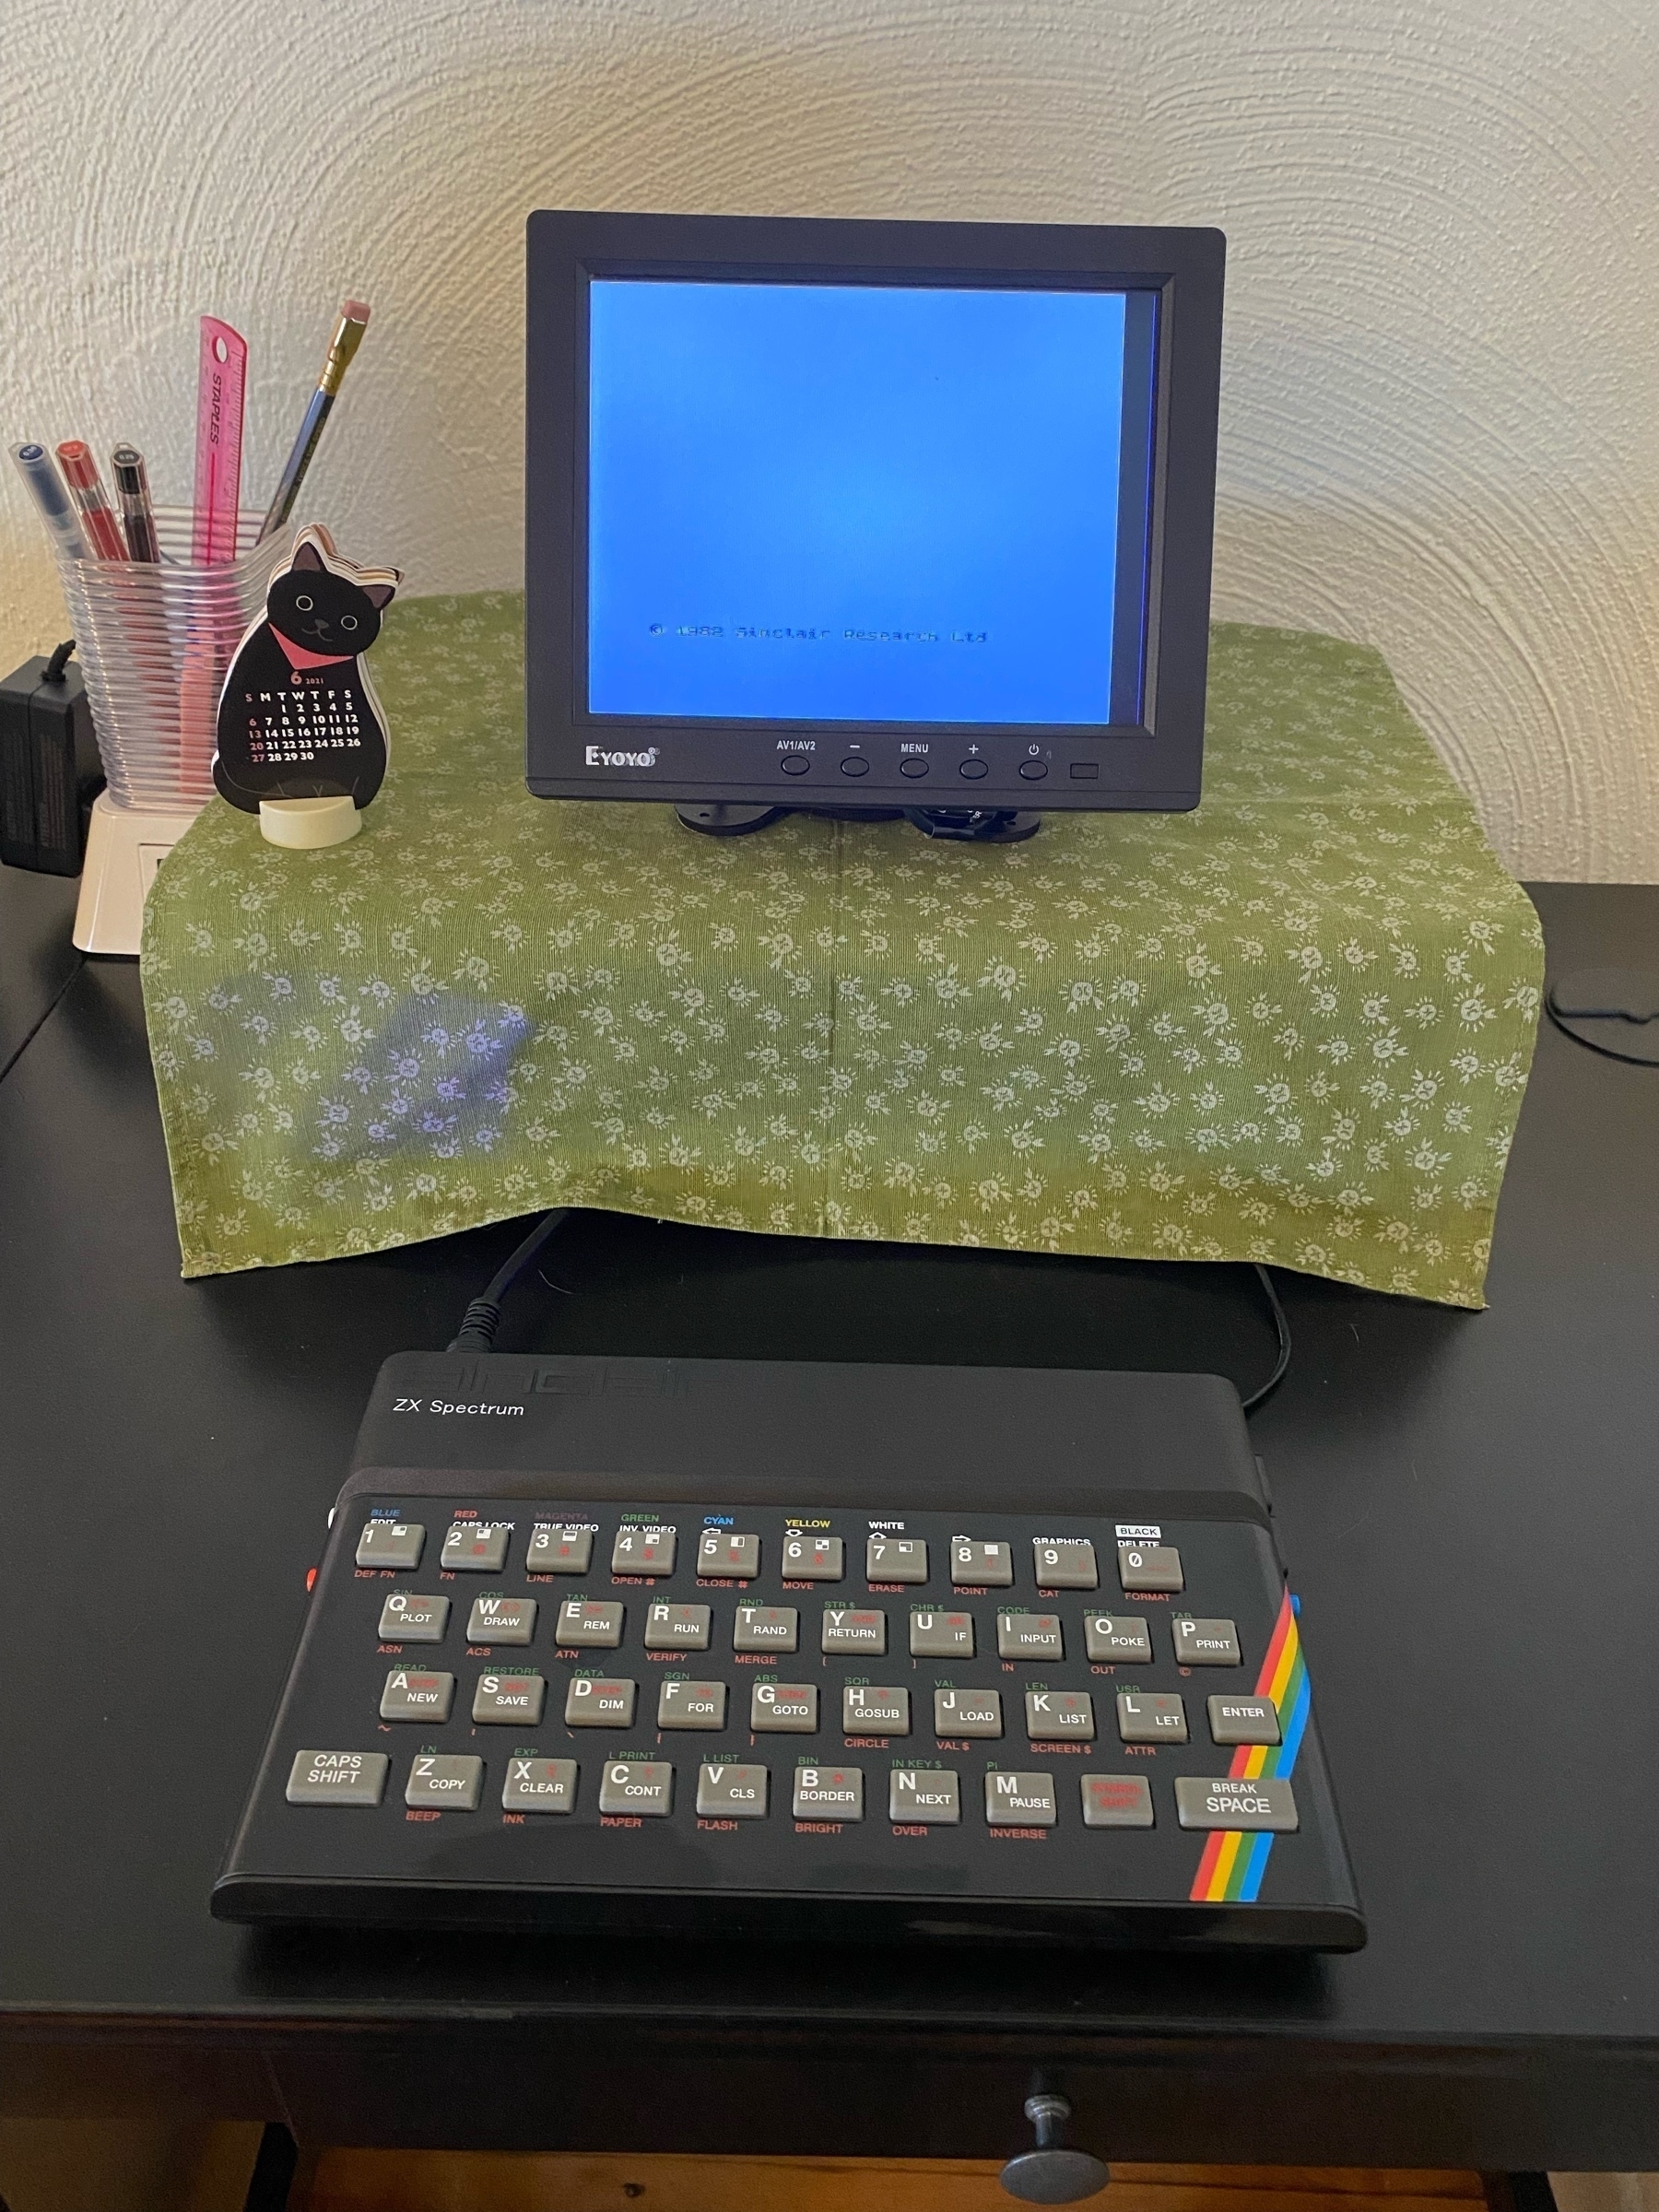 zx spectrum omni connected to small monitor